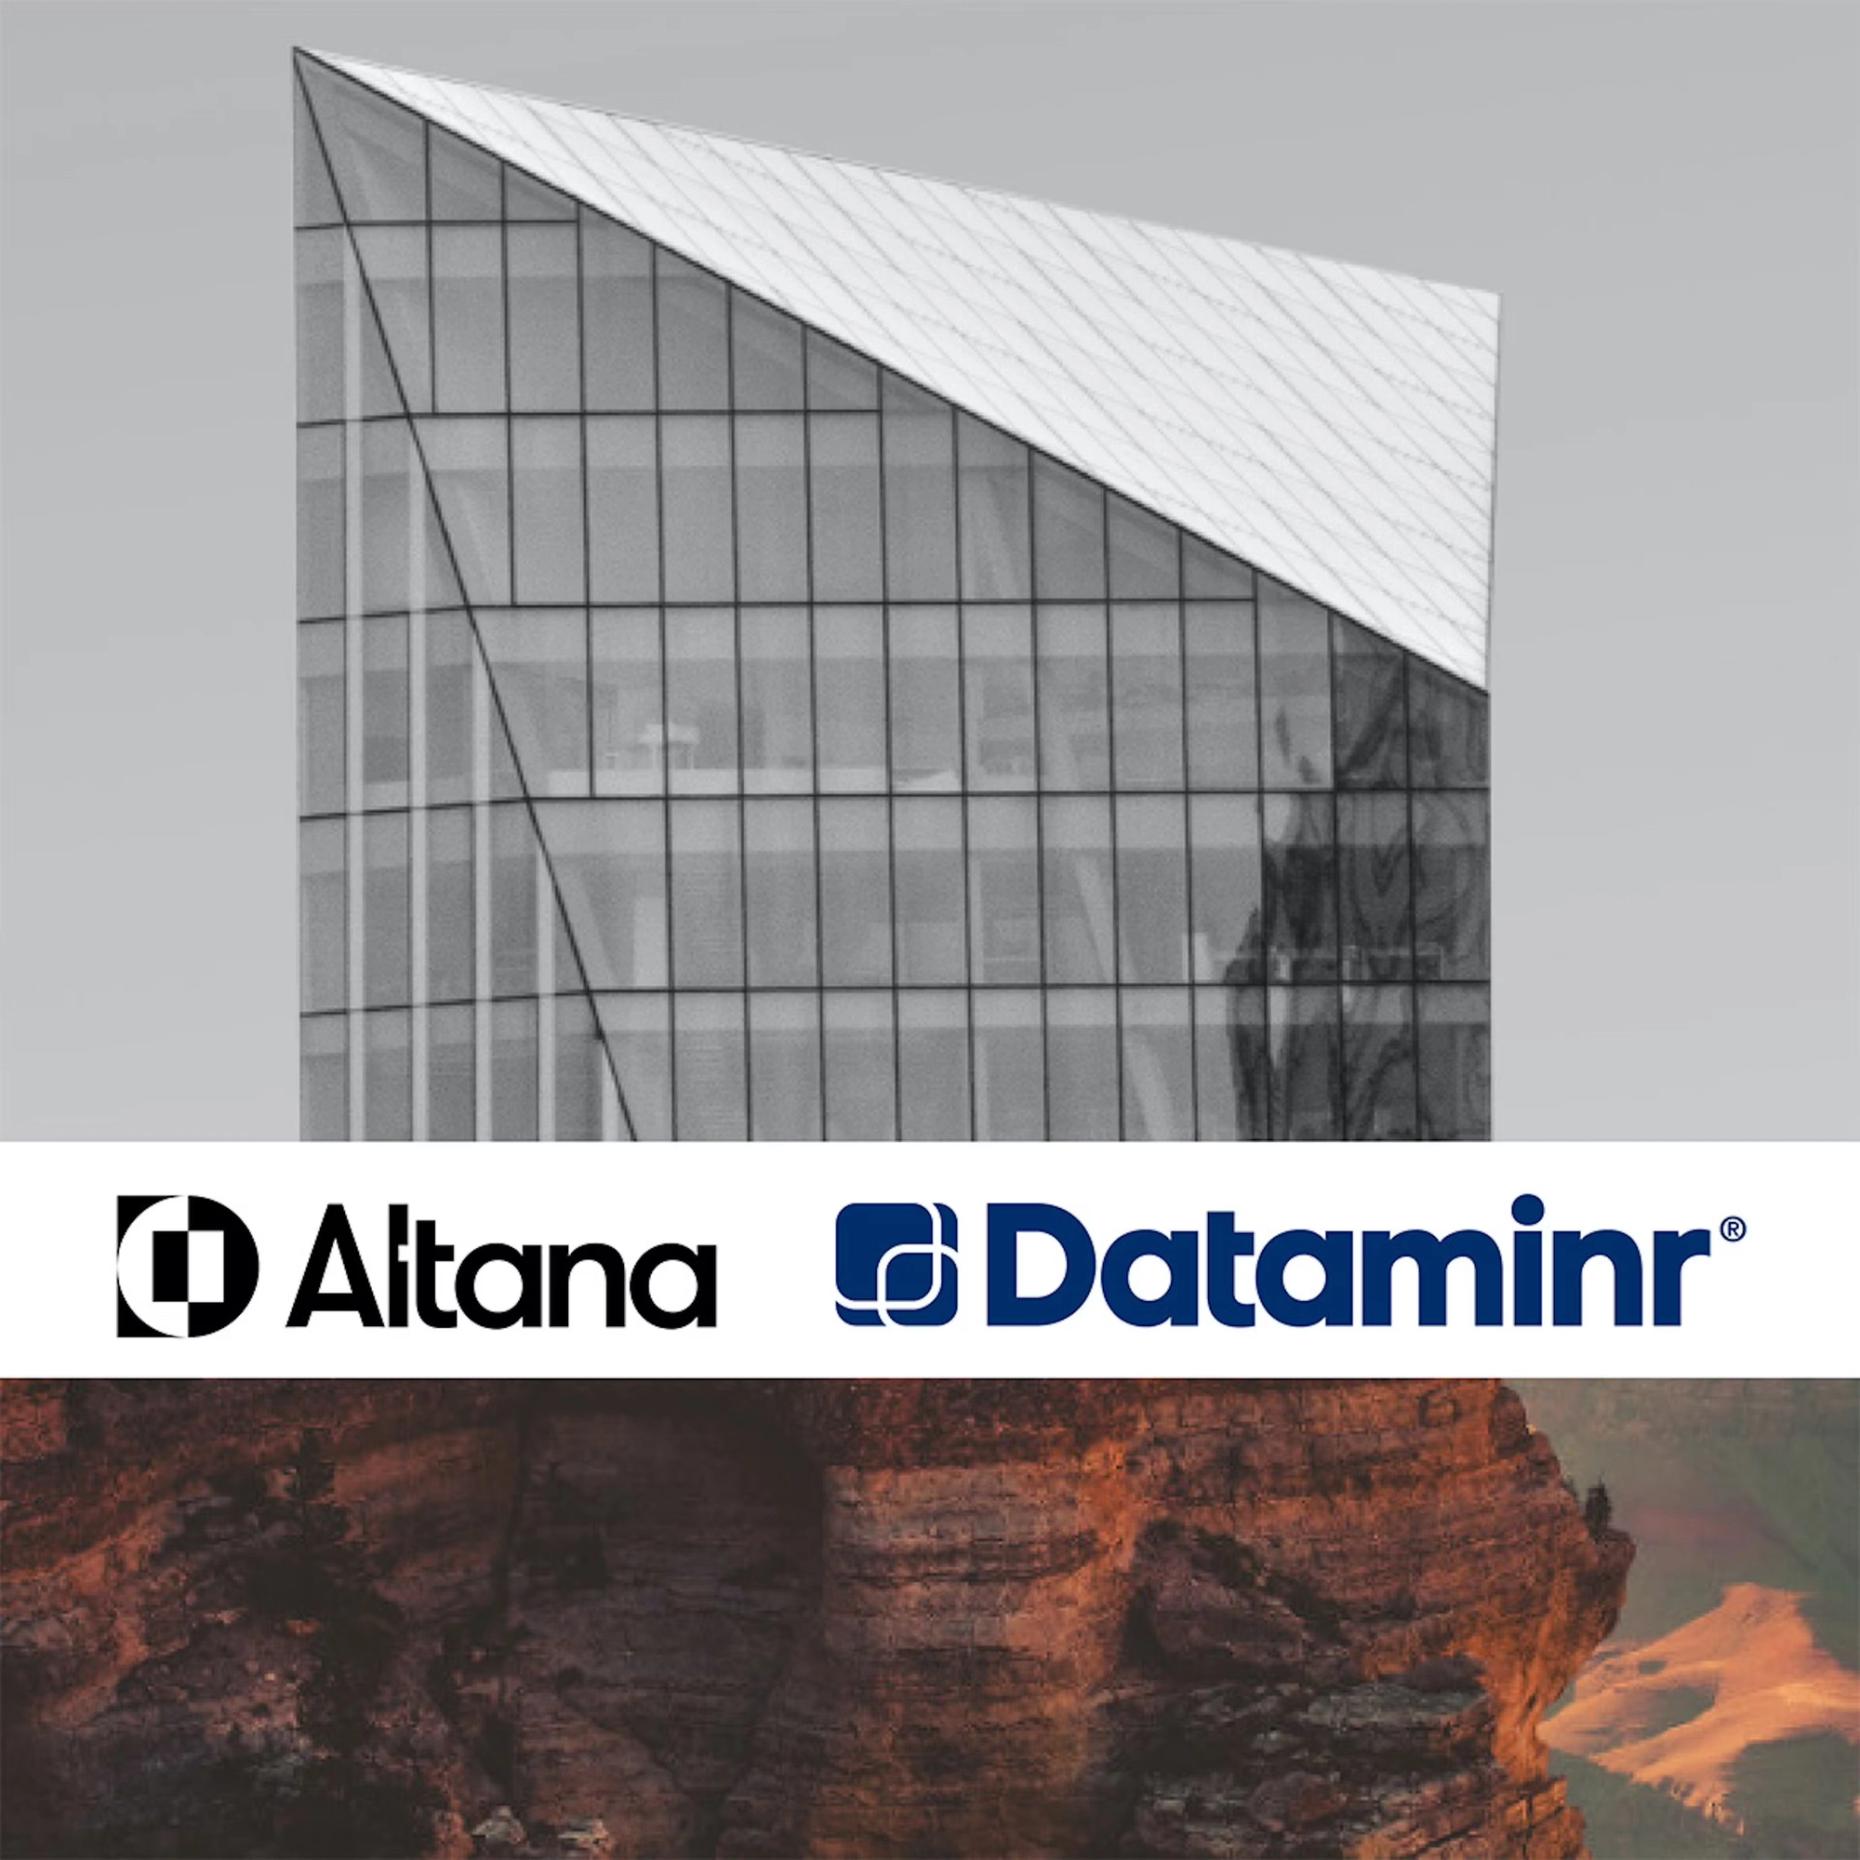 Altana and Dataminr logos over a unique building featuring sharp angles